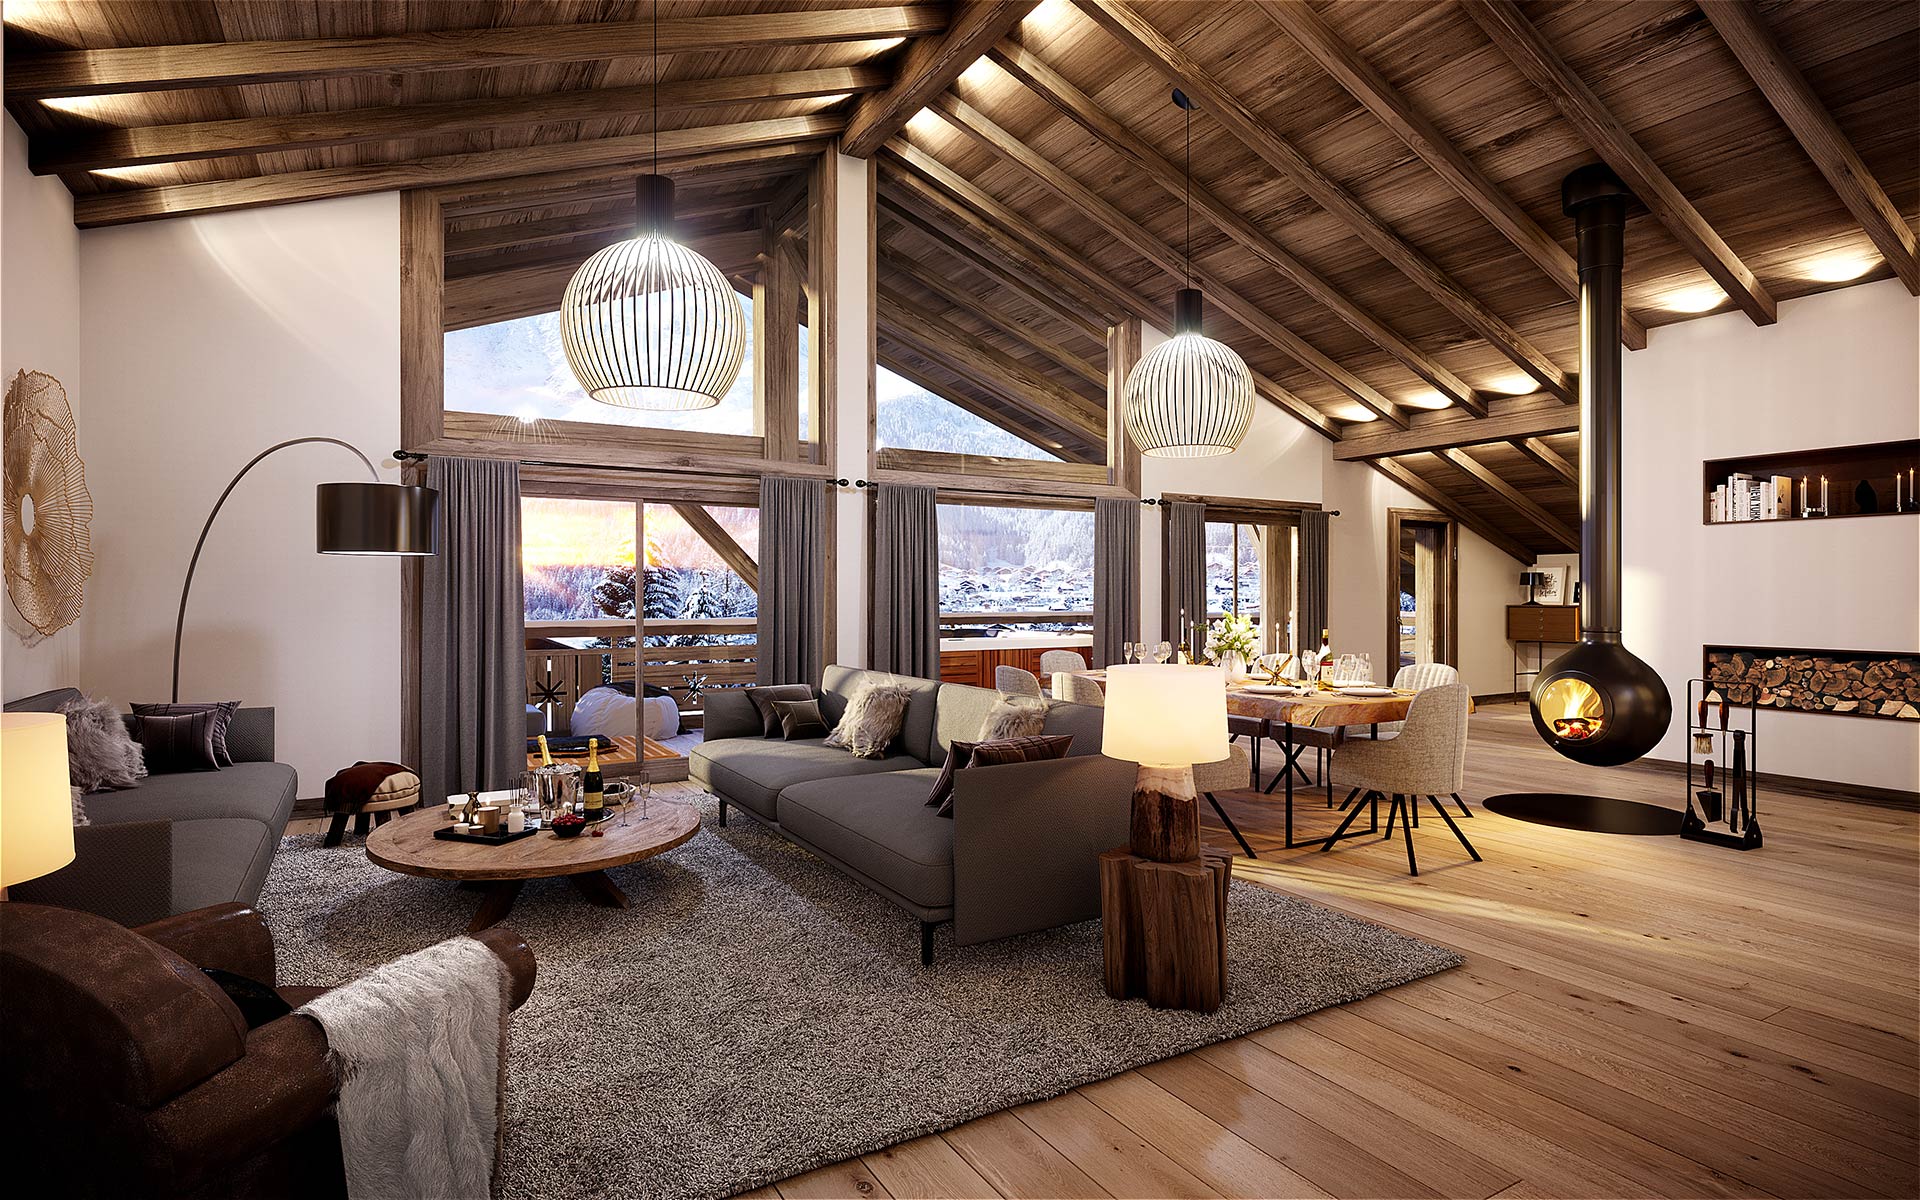 3D perspective of a luxury chalet interior